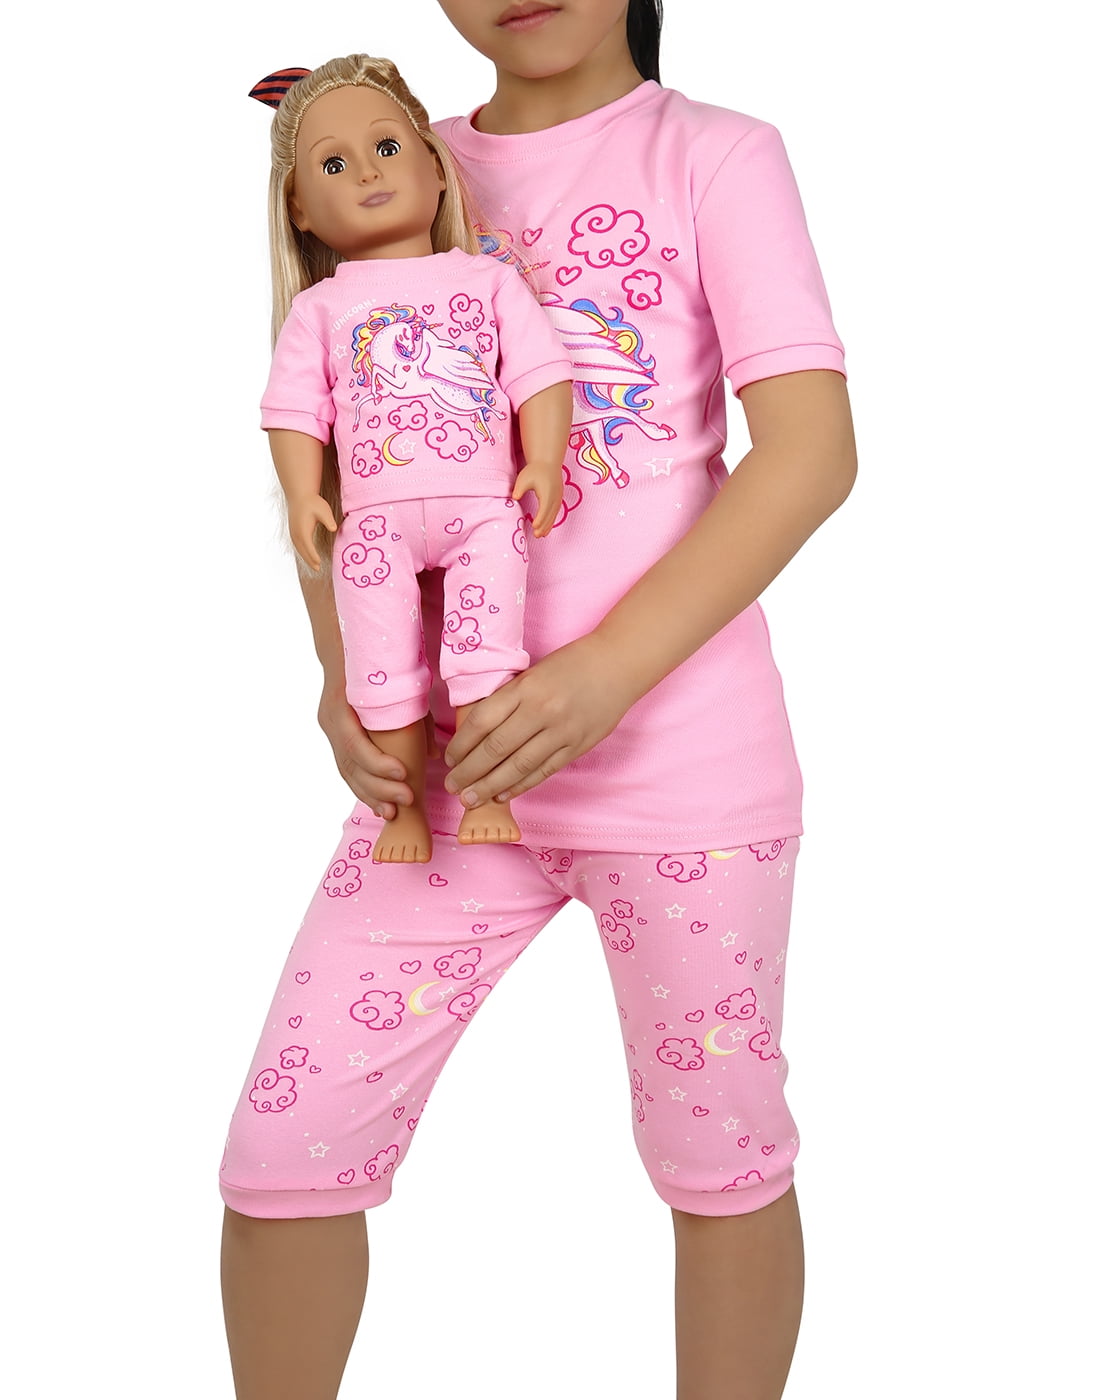 HDE - HDE Girls Pajamas - Pajama Set with for Girl with Matching Doll  Outfit - 100% Cotton, Breathable Kids PJ Sets with Cute Unicorn Design -  Doll Pyjamas Fit American Girl